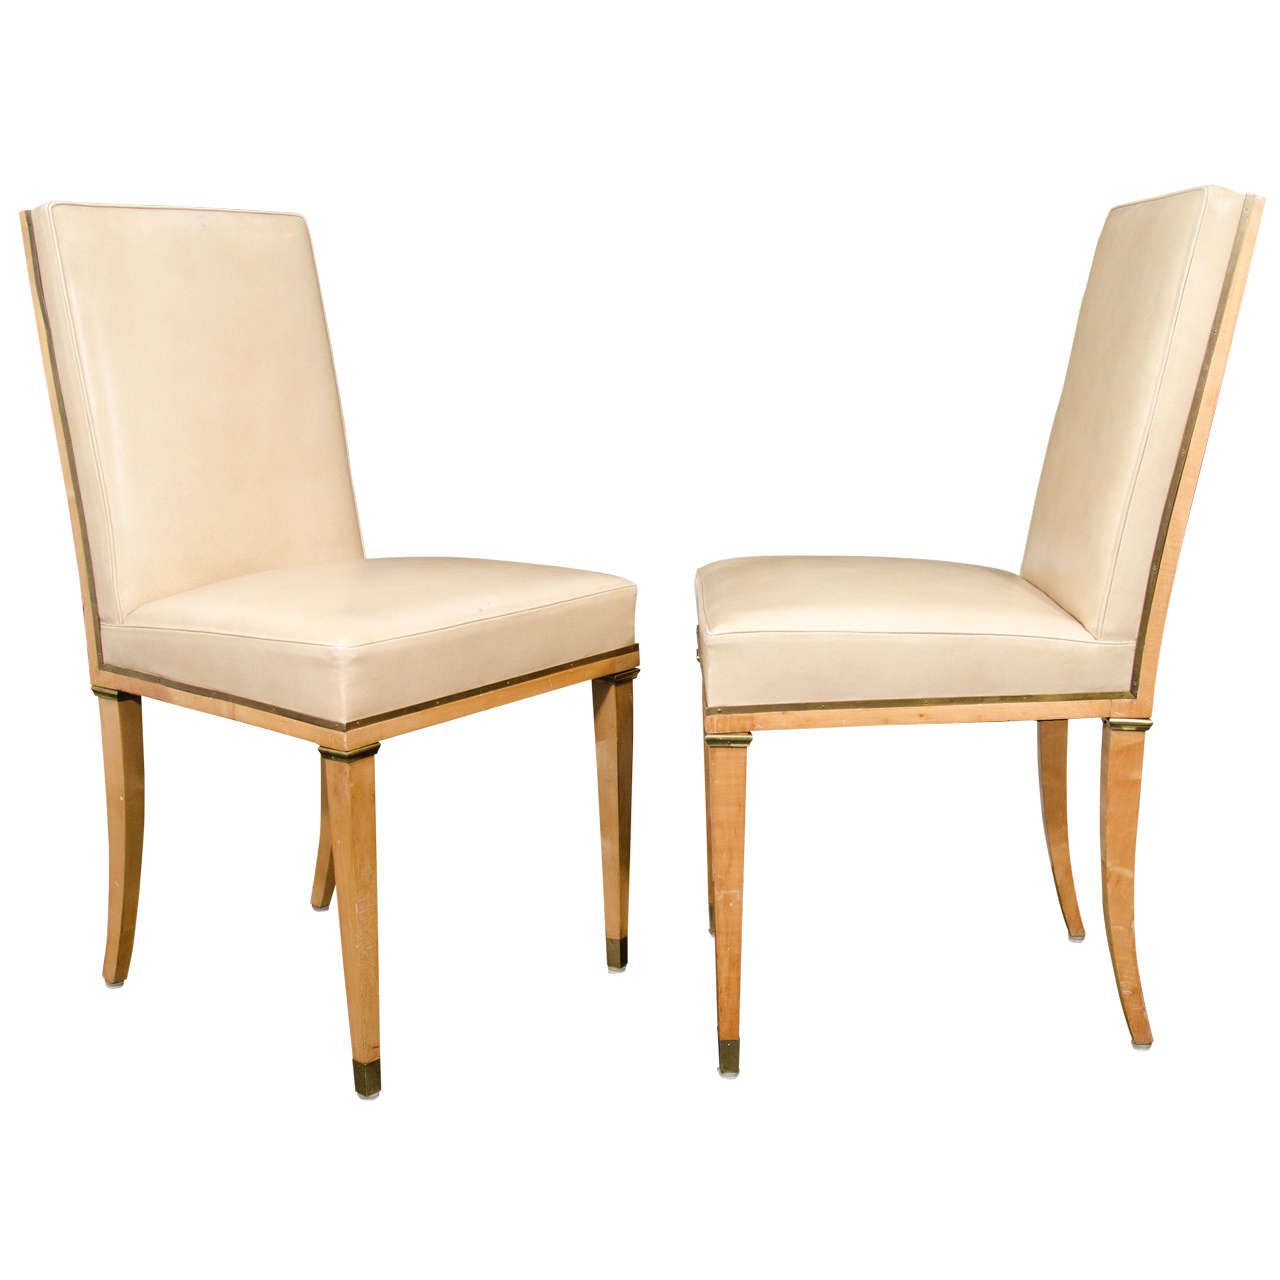 Andre Arbus Set of Twelve Dining Chairs